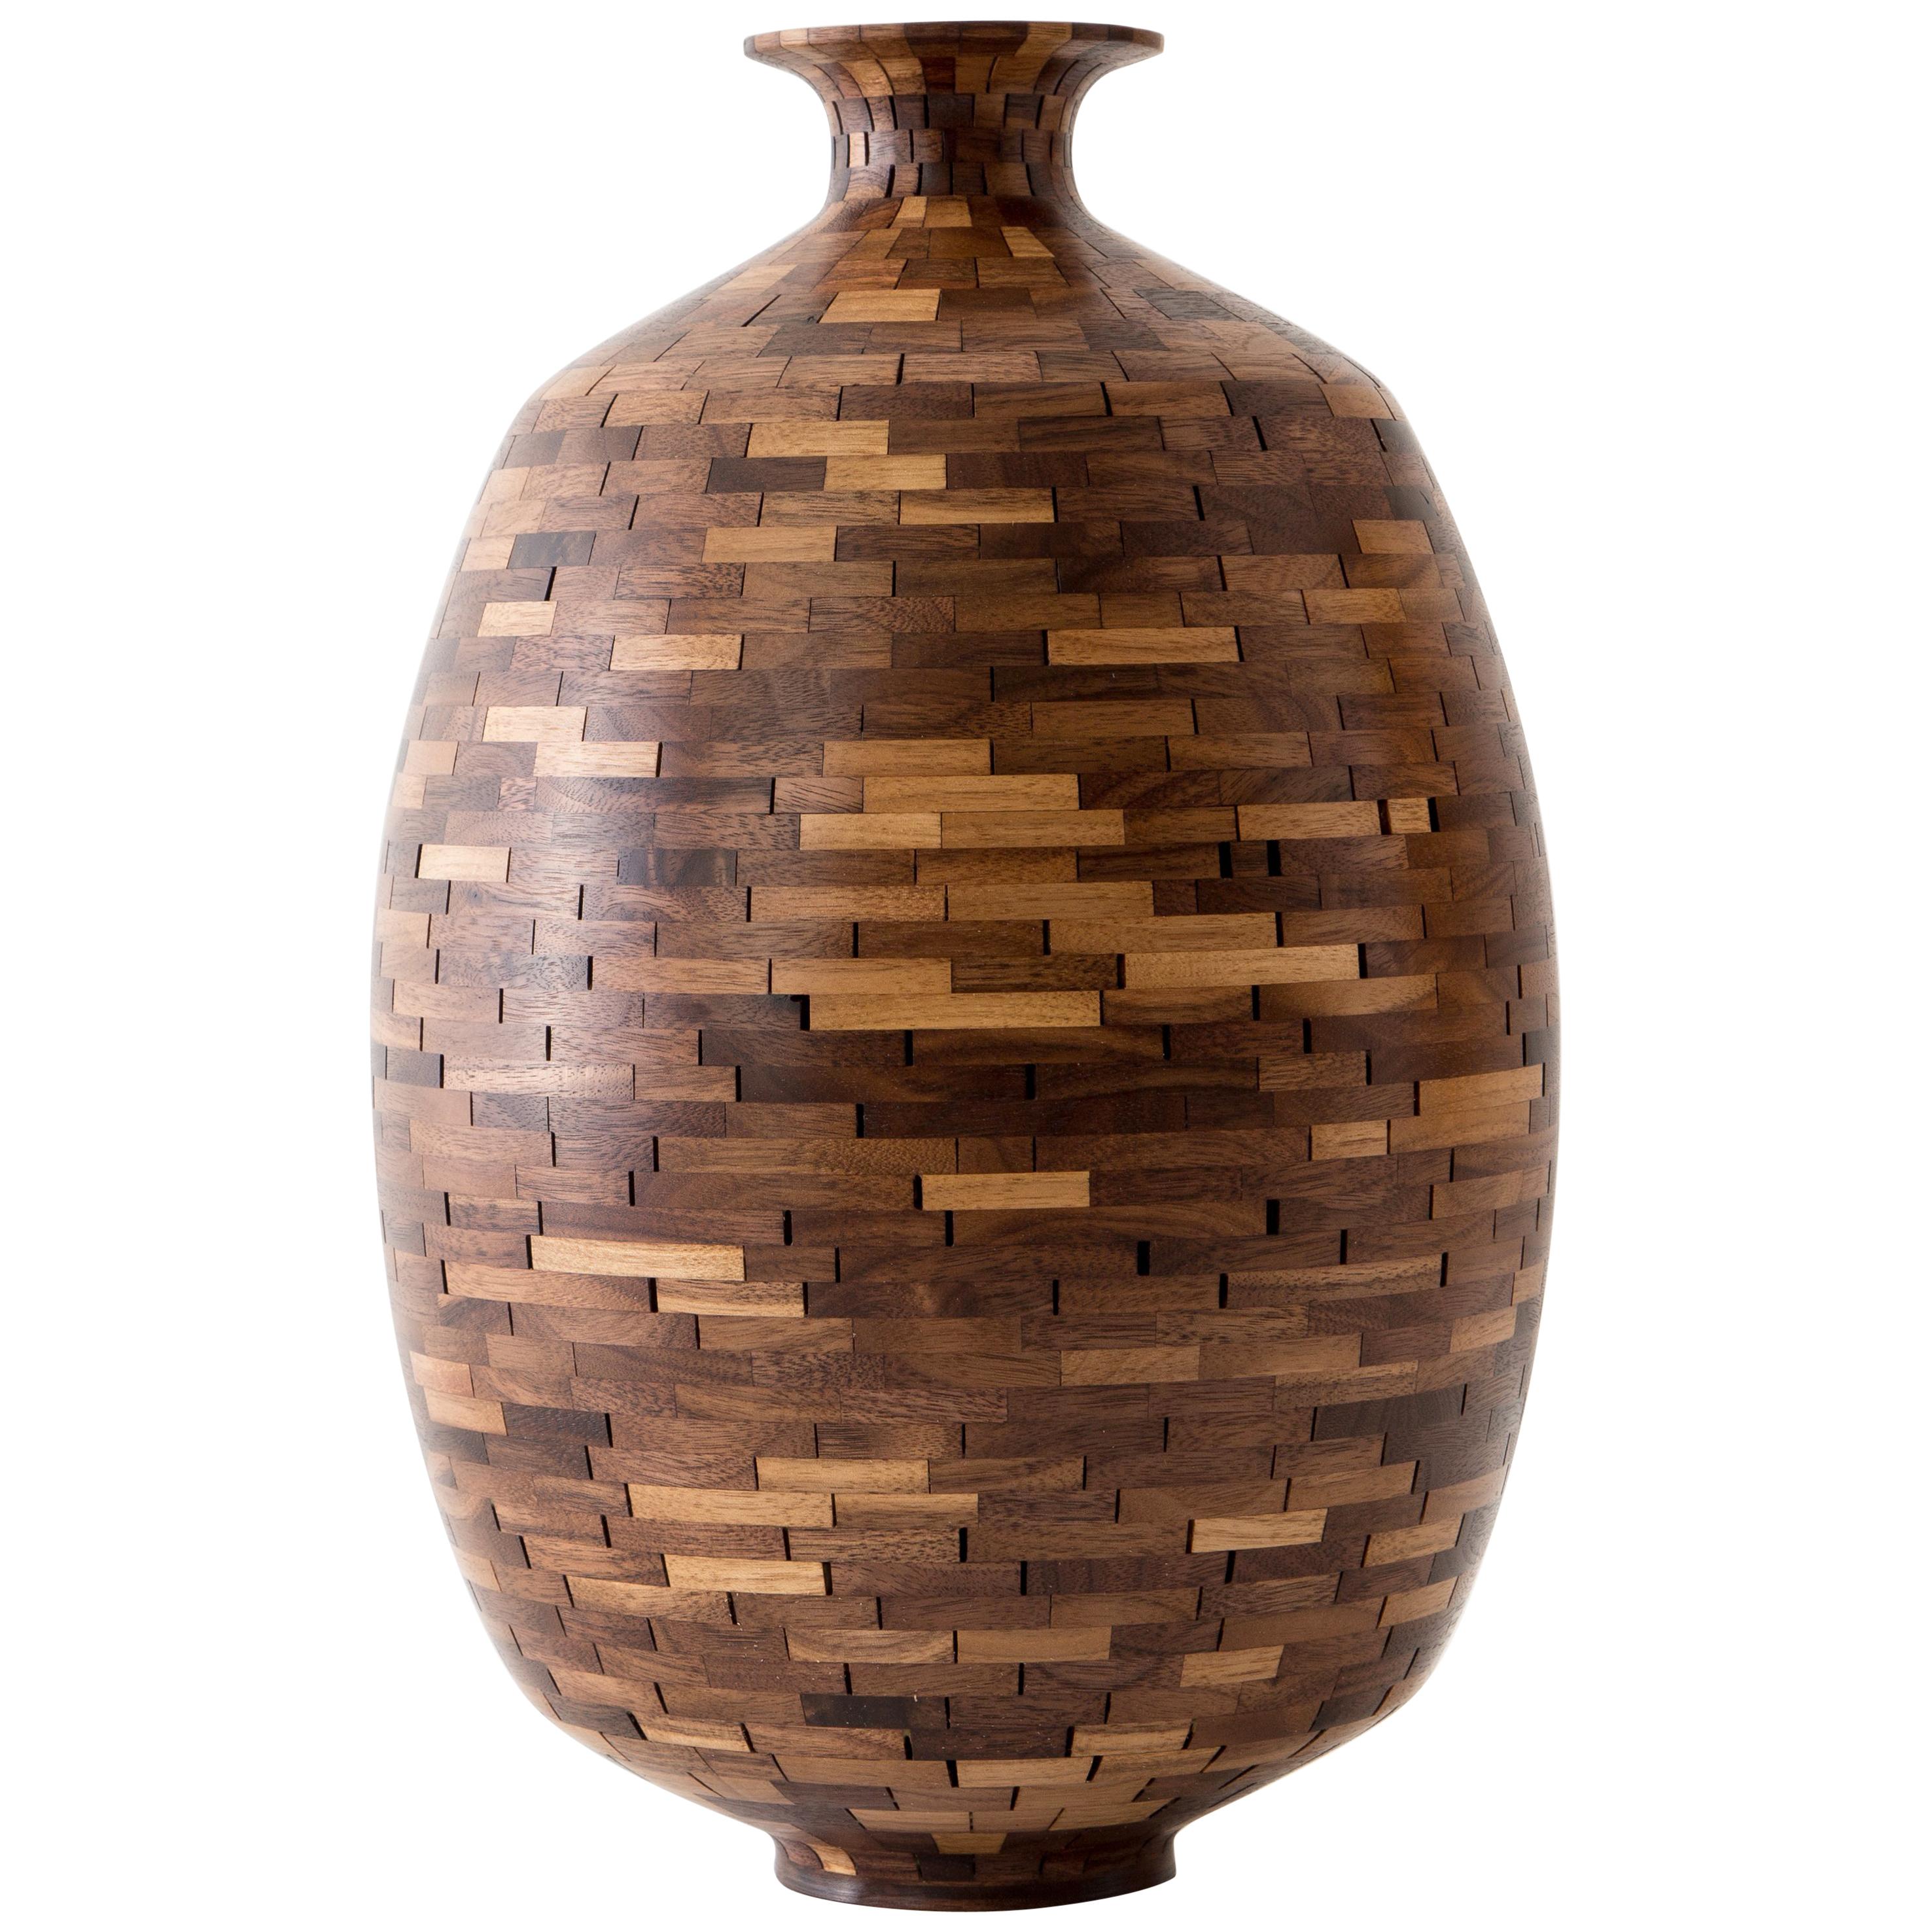 STACKED Walnut Vessel by Richard Haining, Available Now